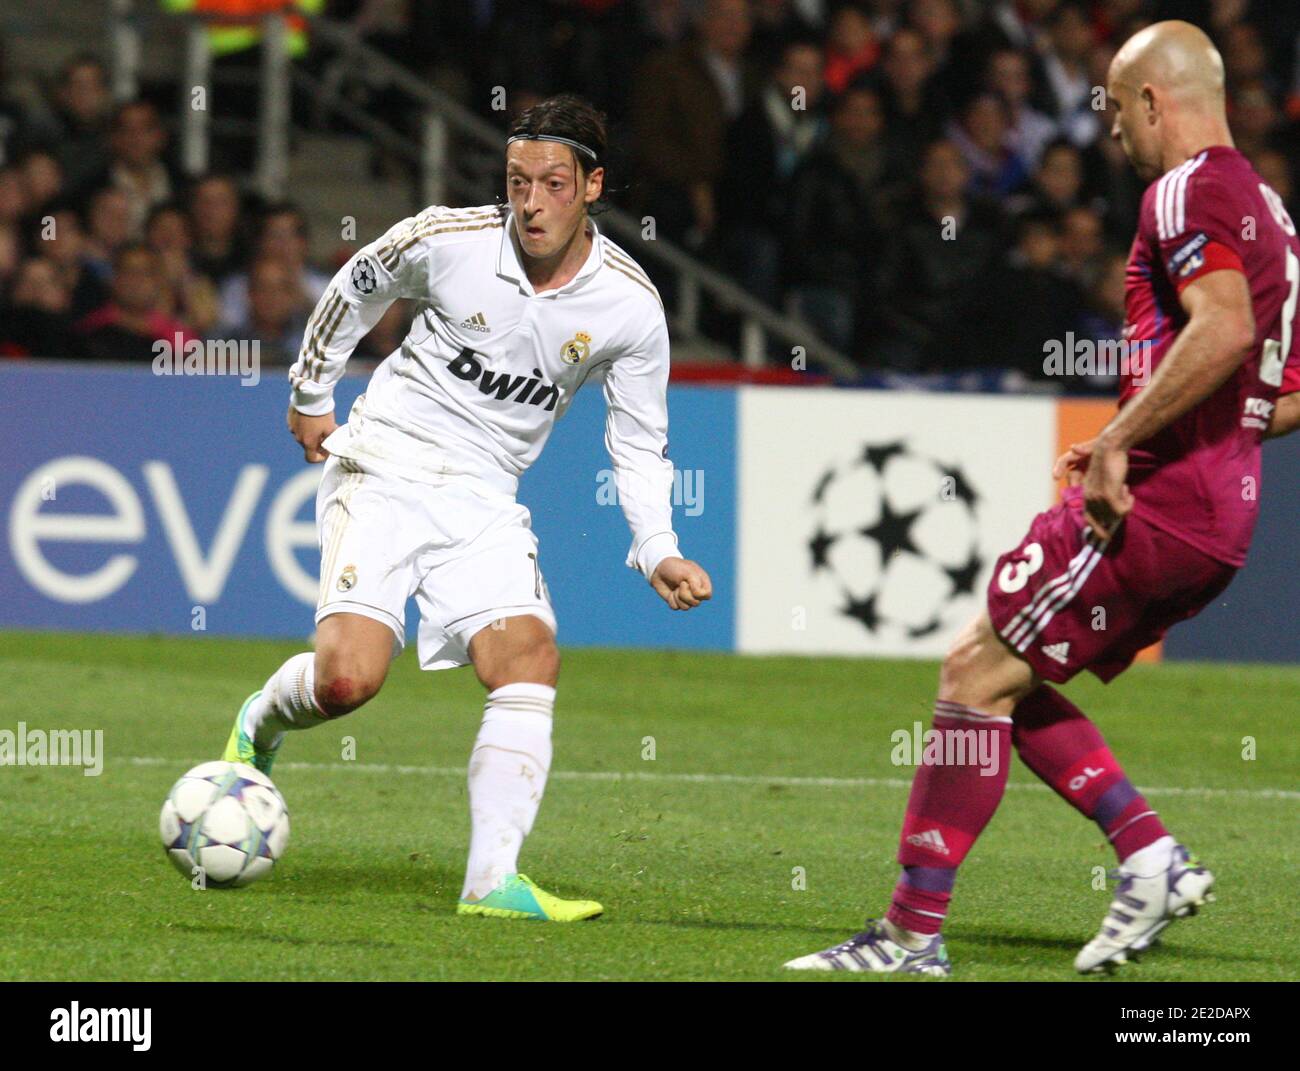 Real Madrid's Mesut Ozil during the UEFA Champions League soccer match, Olympique Lyonnais Vs Real Madrid at Gerland stadium in Lyon, France on November 2, 2011. Real Madrid won 2-0. Photo by Vincent Dargent/ABACAPRESS.COM Stock Photo